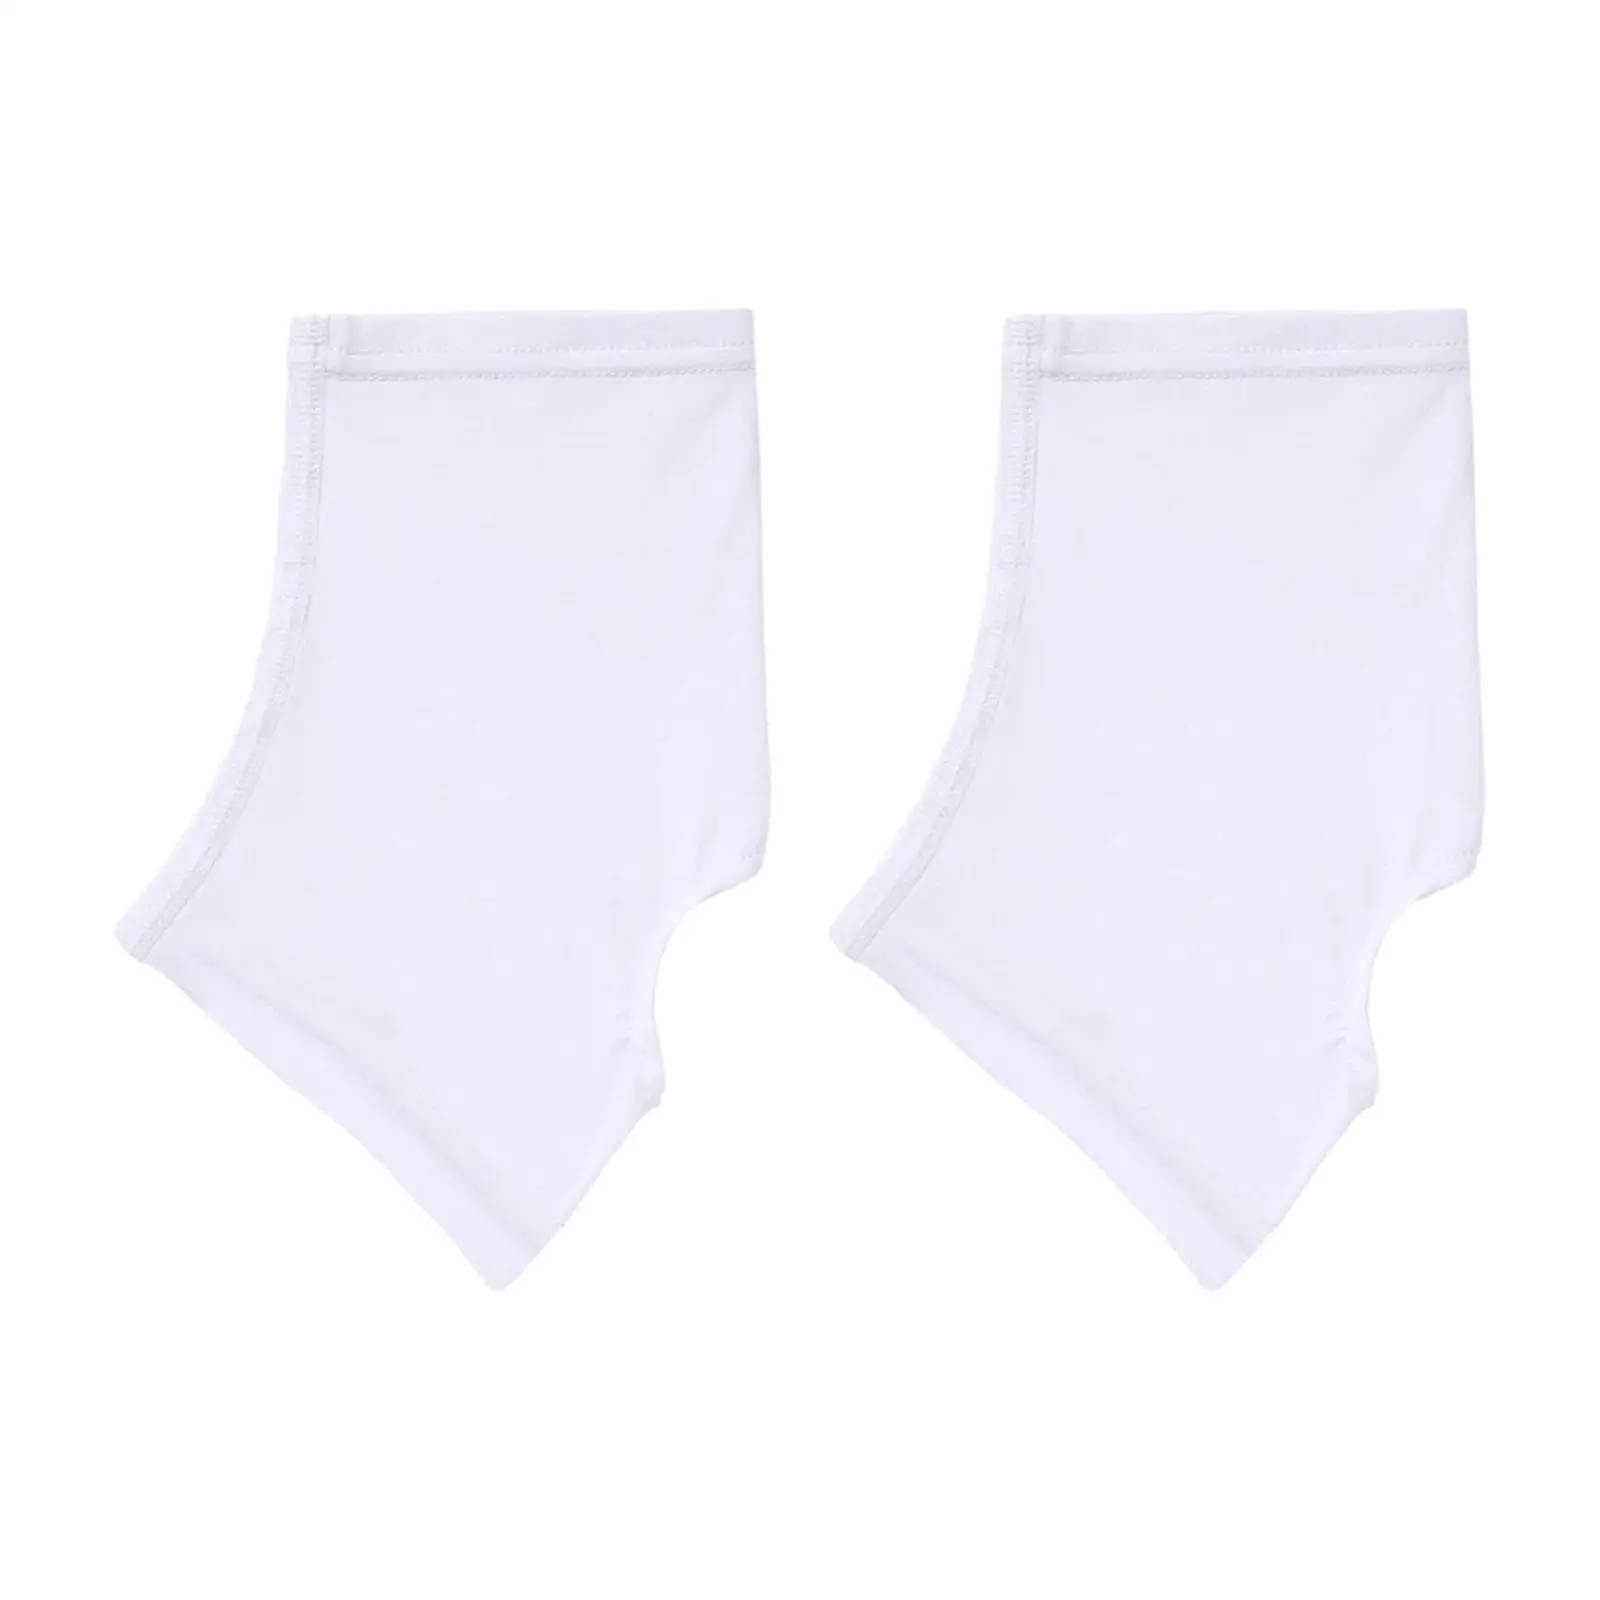 2Pcs Spats Reusable Softball Teenagers Keeps Cleats Tied Turf Pellets Out 1 Pair Elastic Cleat Sleeves Cleat Covers Sports Spats